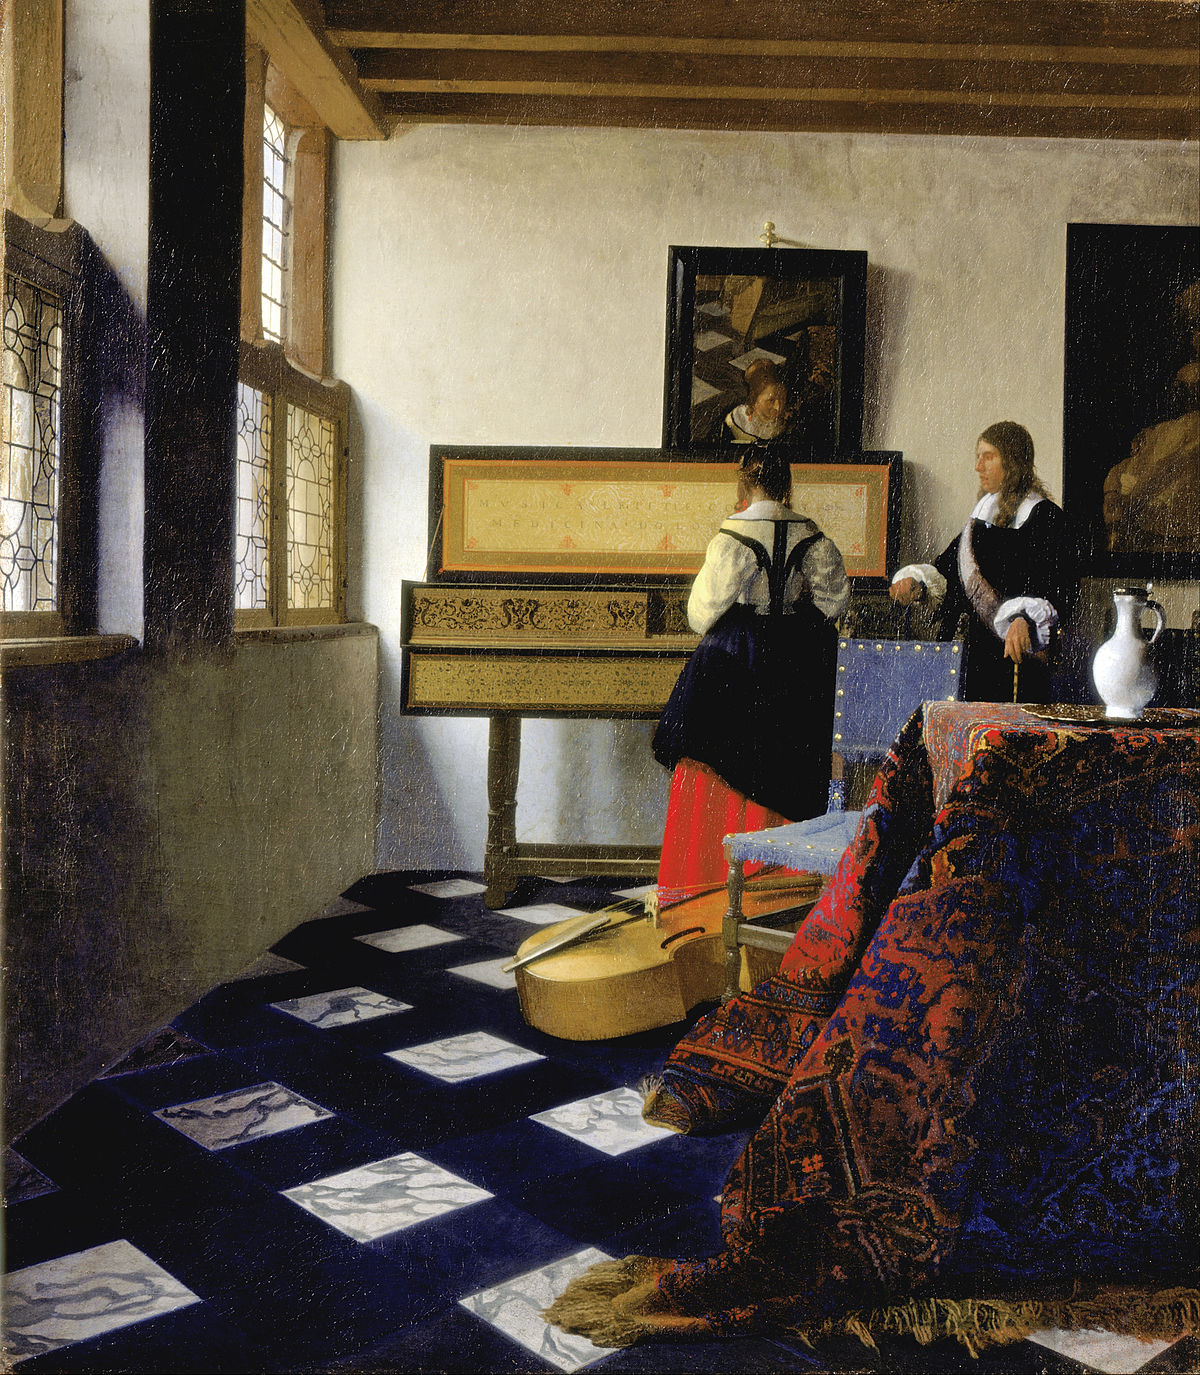 1200px-Johannes_Vermeer_-_Lady_at_the_Virginal_with_a_Gentleman,_'The_Music_Lesson'_-_Google_Art_Project.jpg